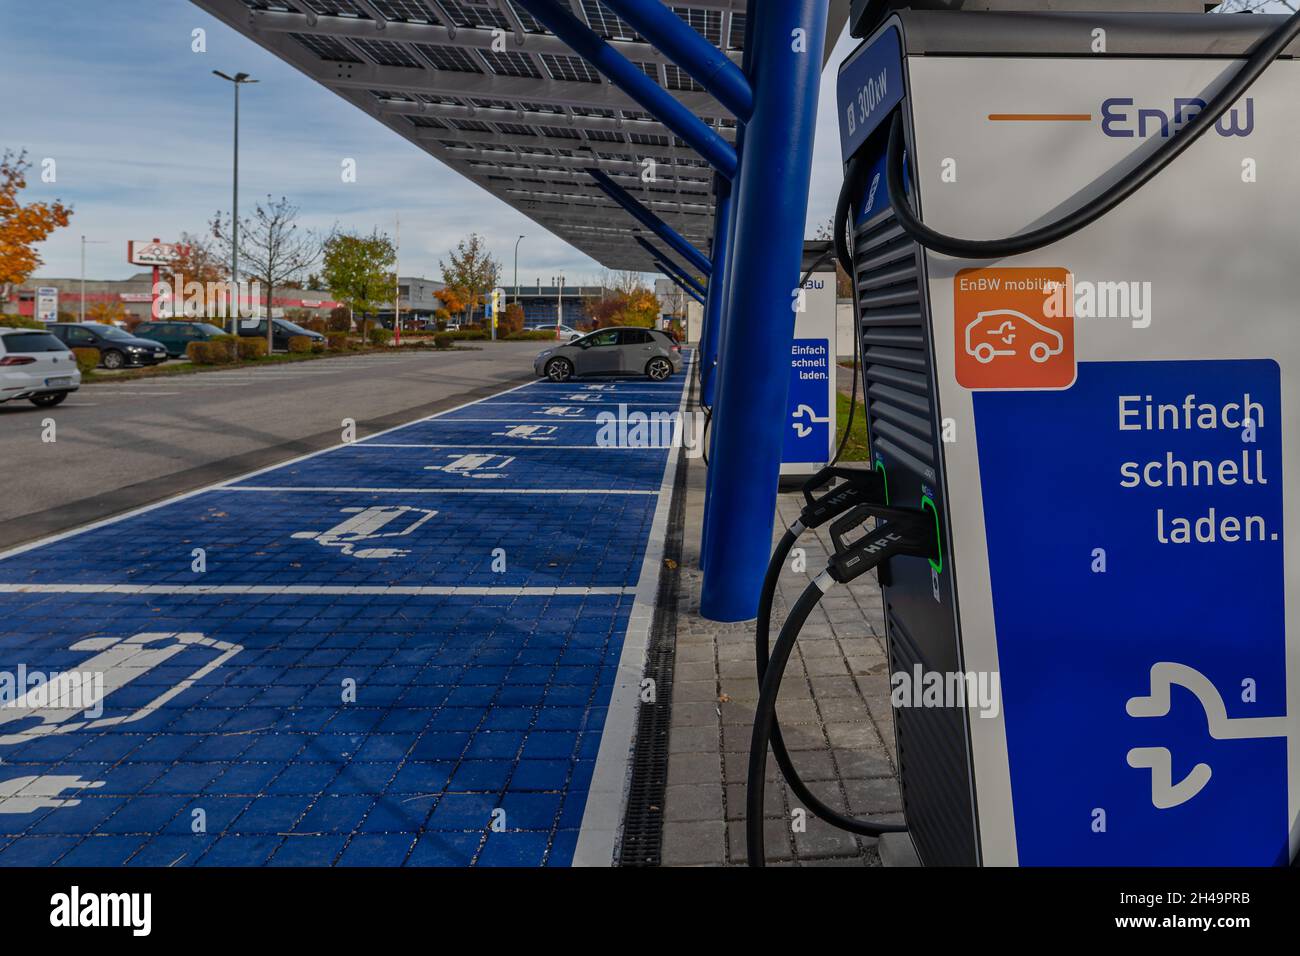 The new e-mobilty charging station of EnBW in the industrial park of Unterhaching, bavaria at the 25th of octobre 2021. Stock Photo